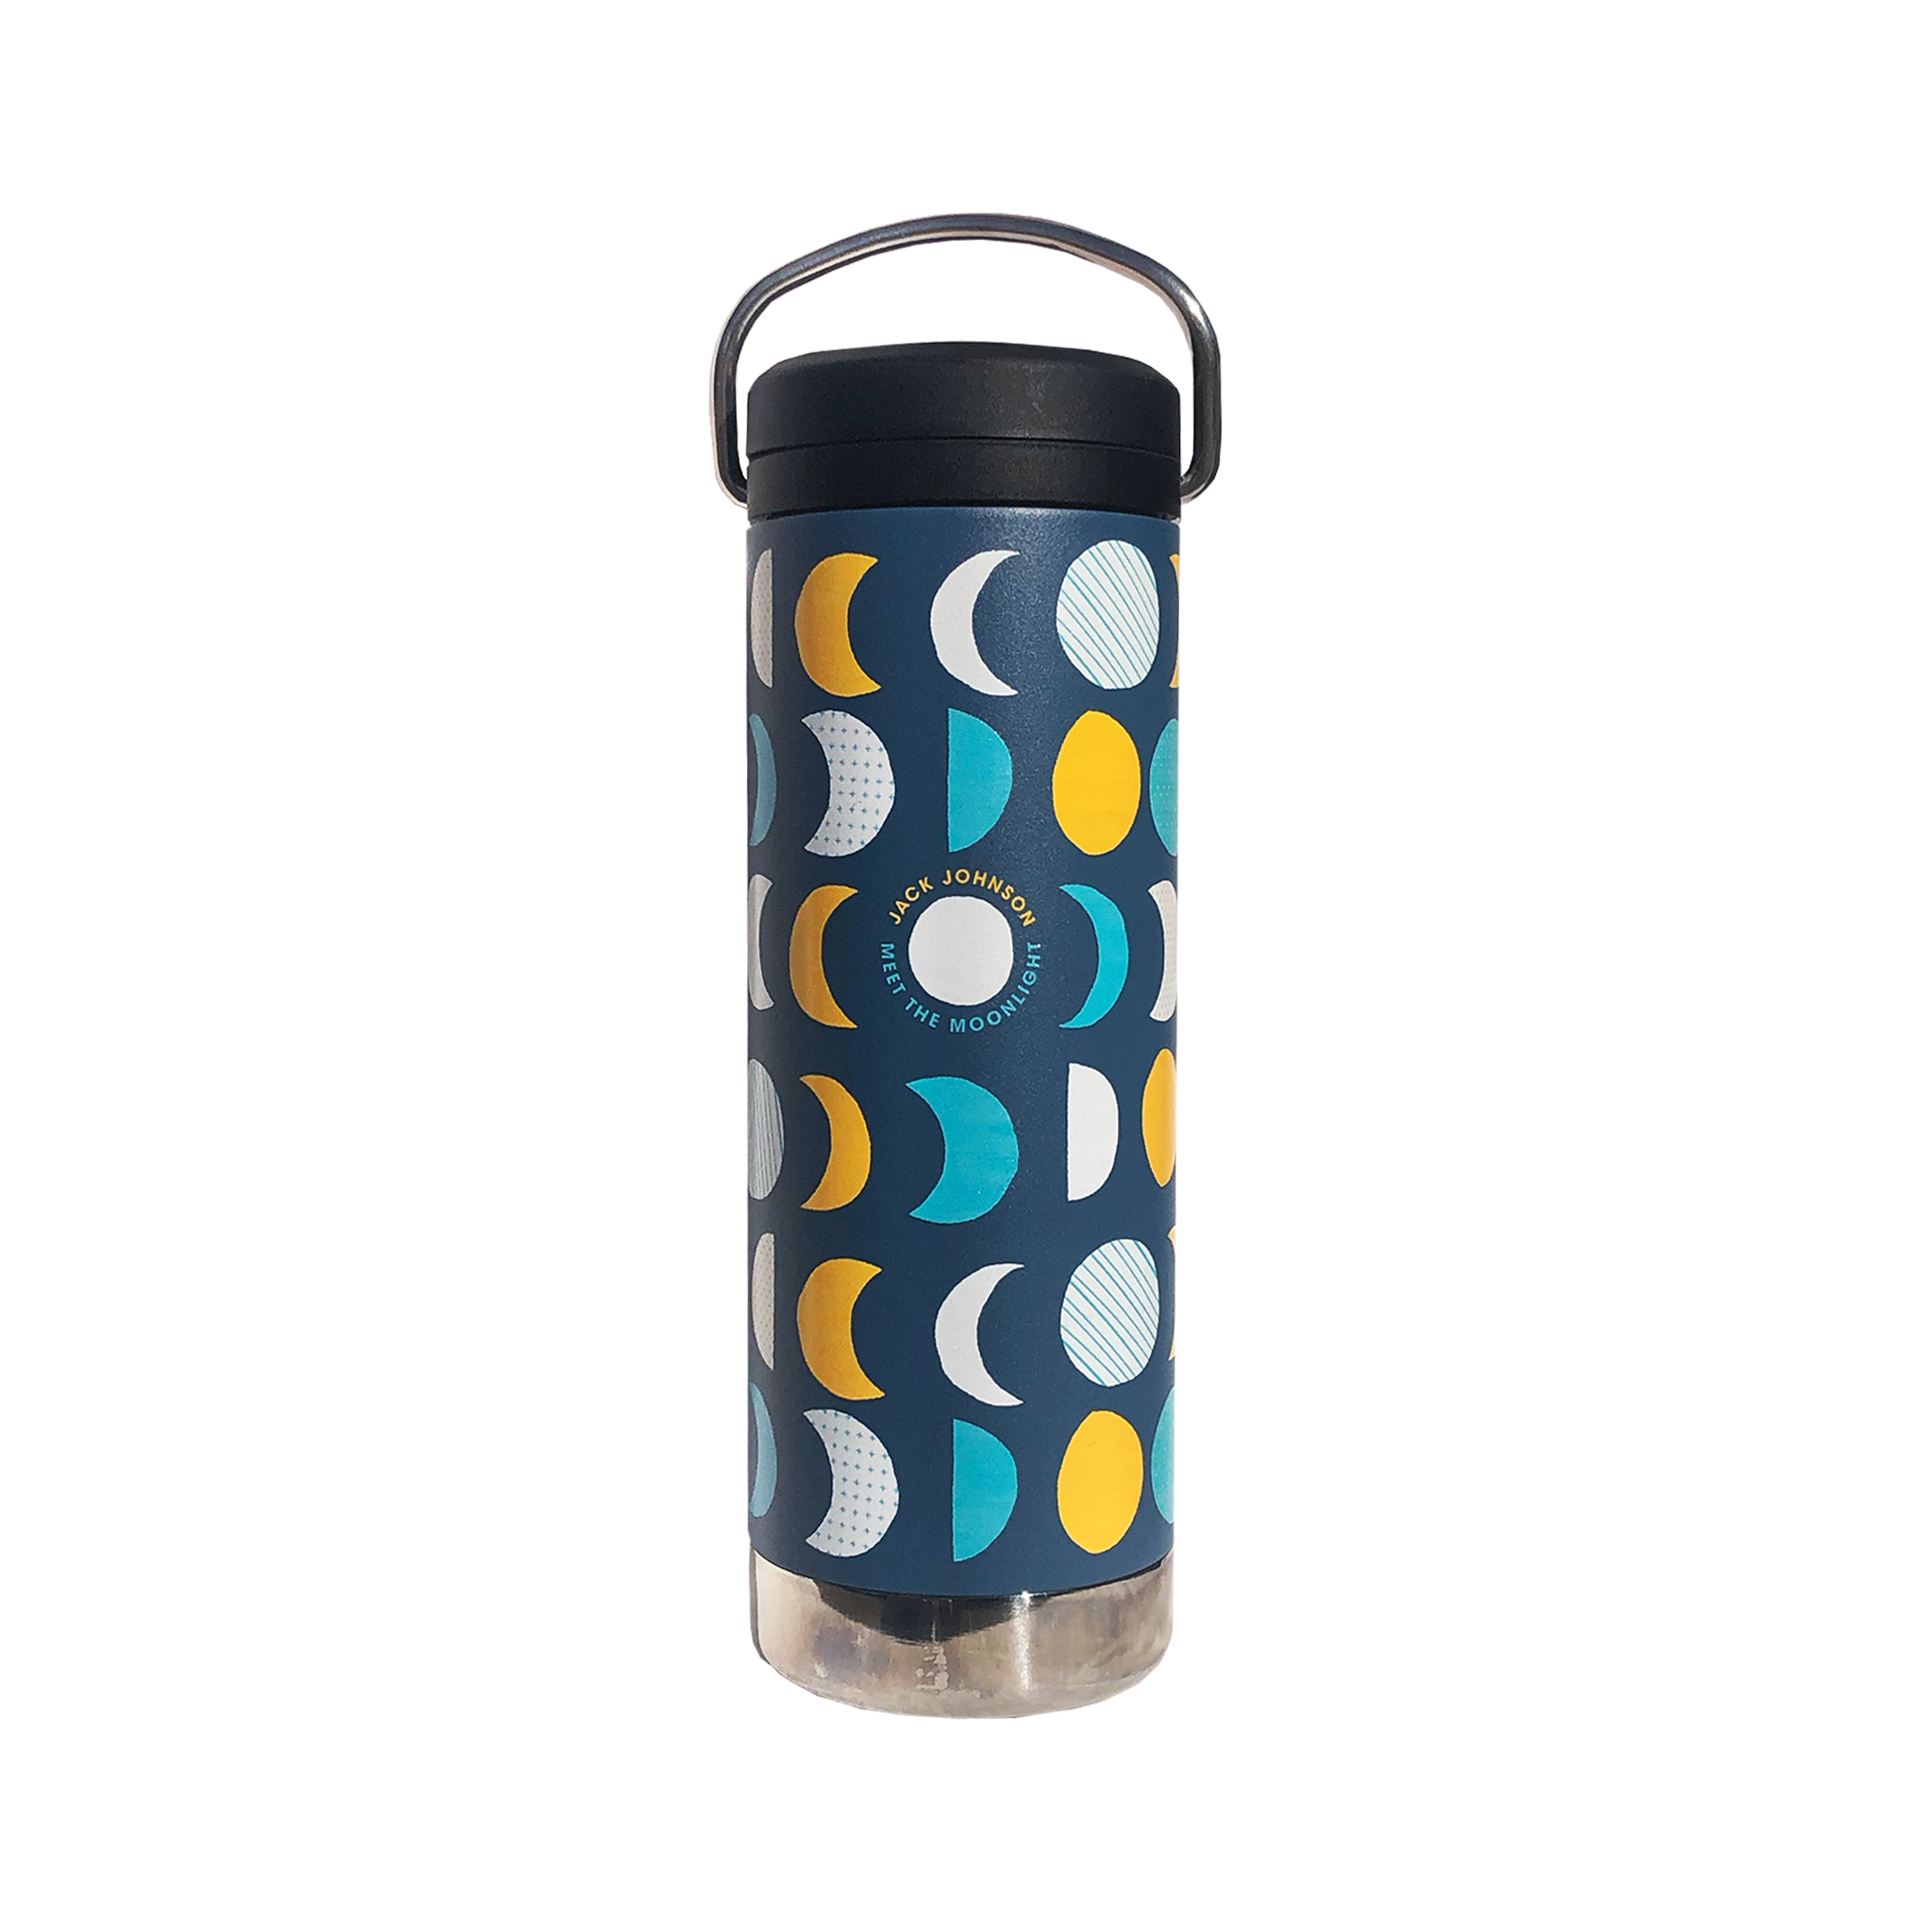 Thermos® Backpack Bottle - 16 oz.